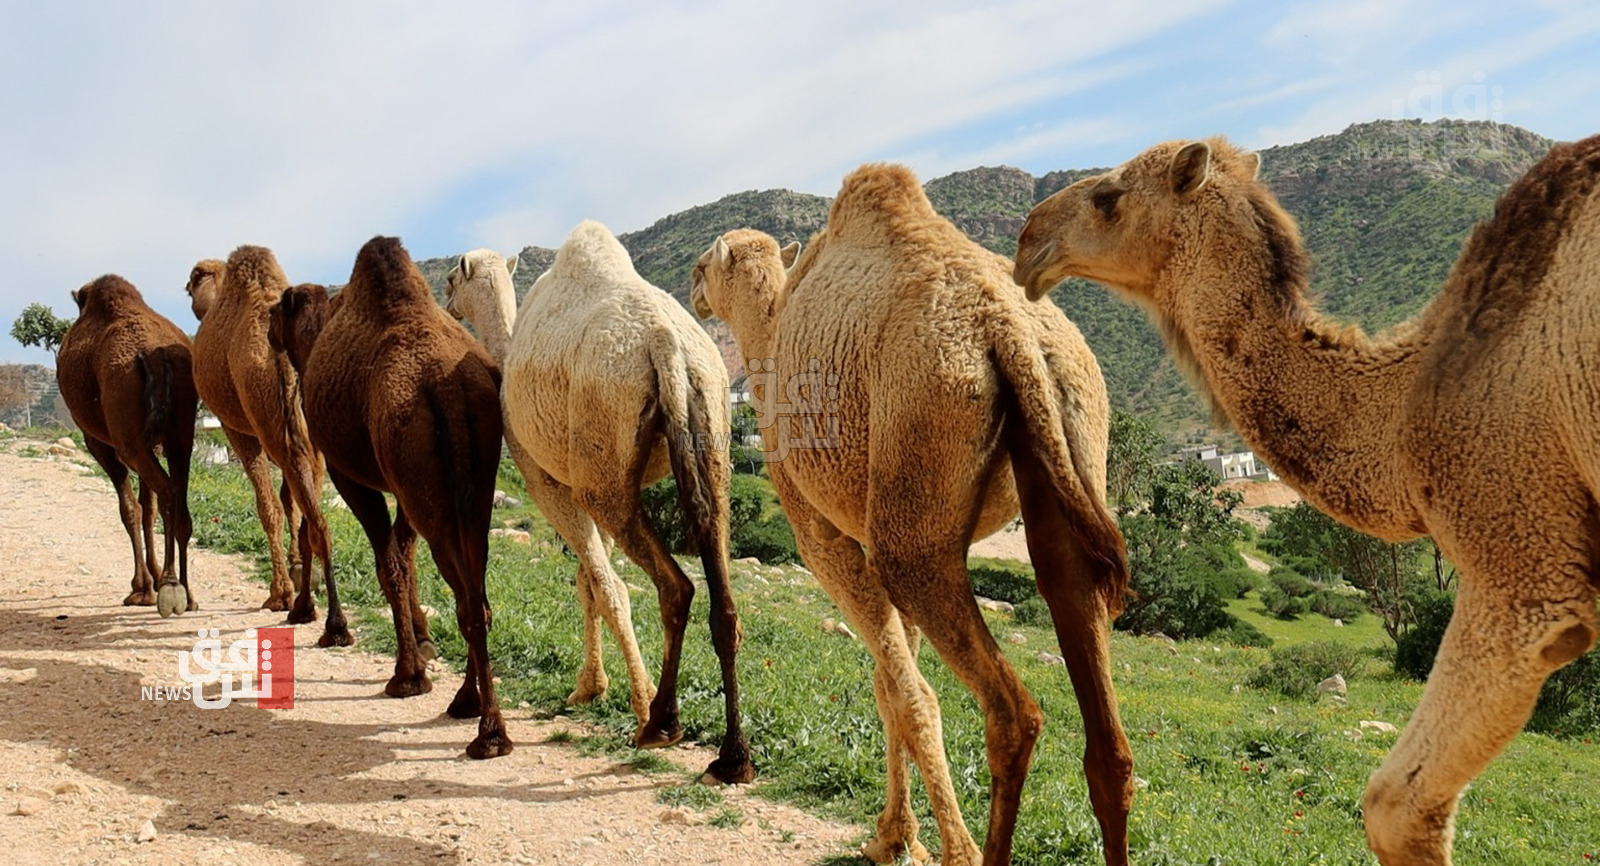 Nomadic camel herders adapt to a new environment in the Kurdistan region Amid climate challenges